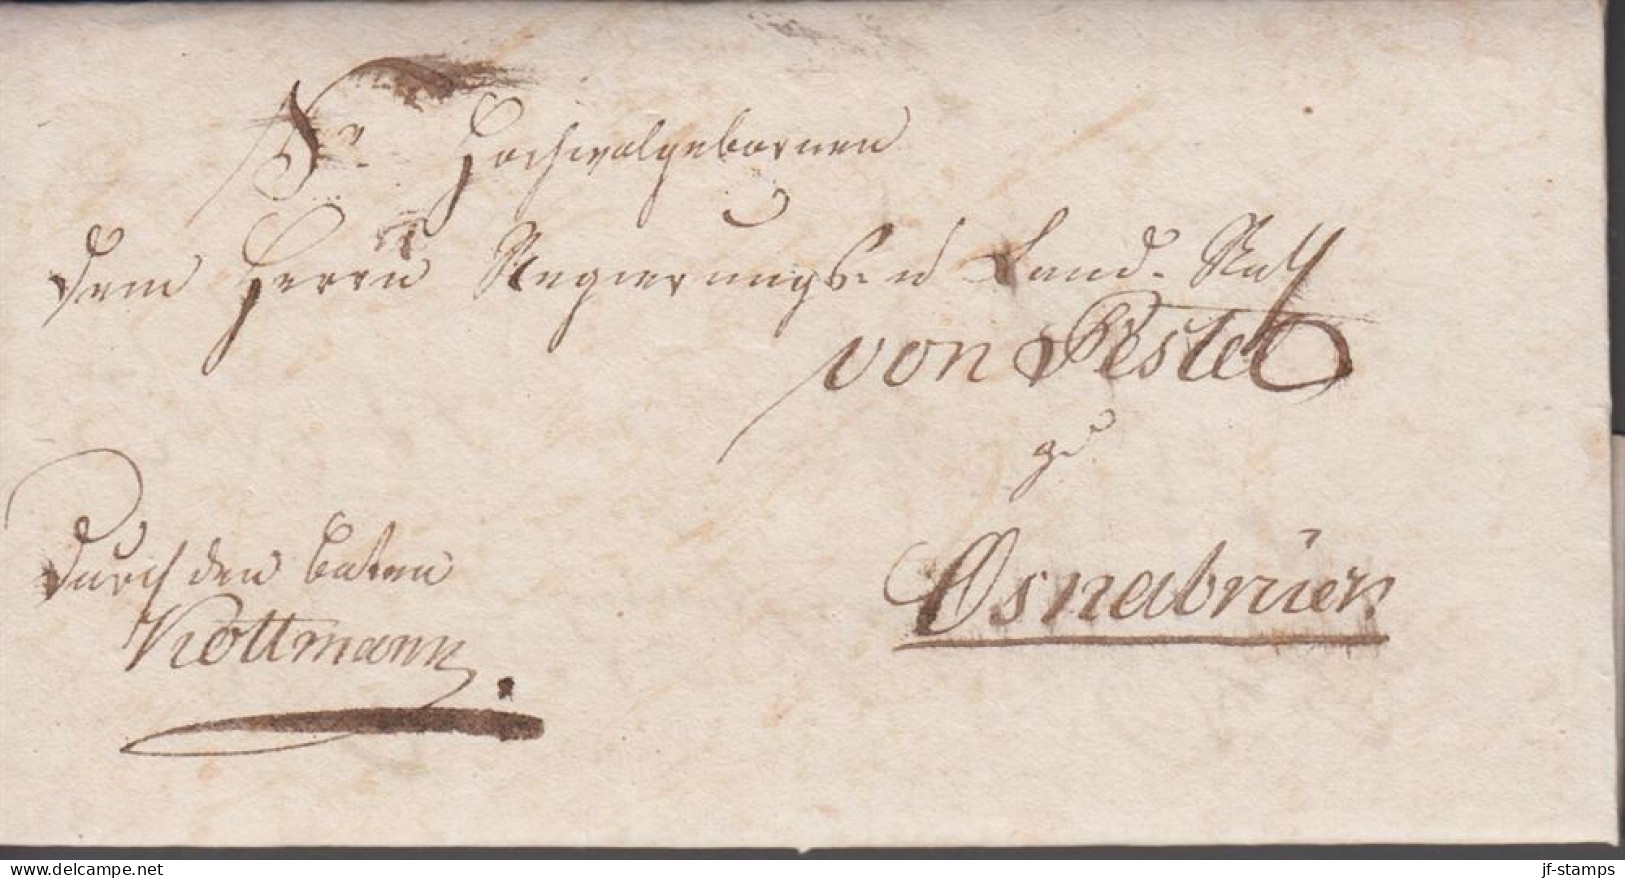 1830. DEUTSCHLAND. Very Interesting And Beautiful Old Double Used Cover. Bruche And Osnabrien.  - JF436620 - Préphilatélie